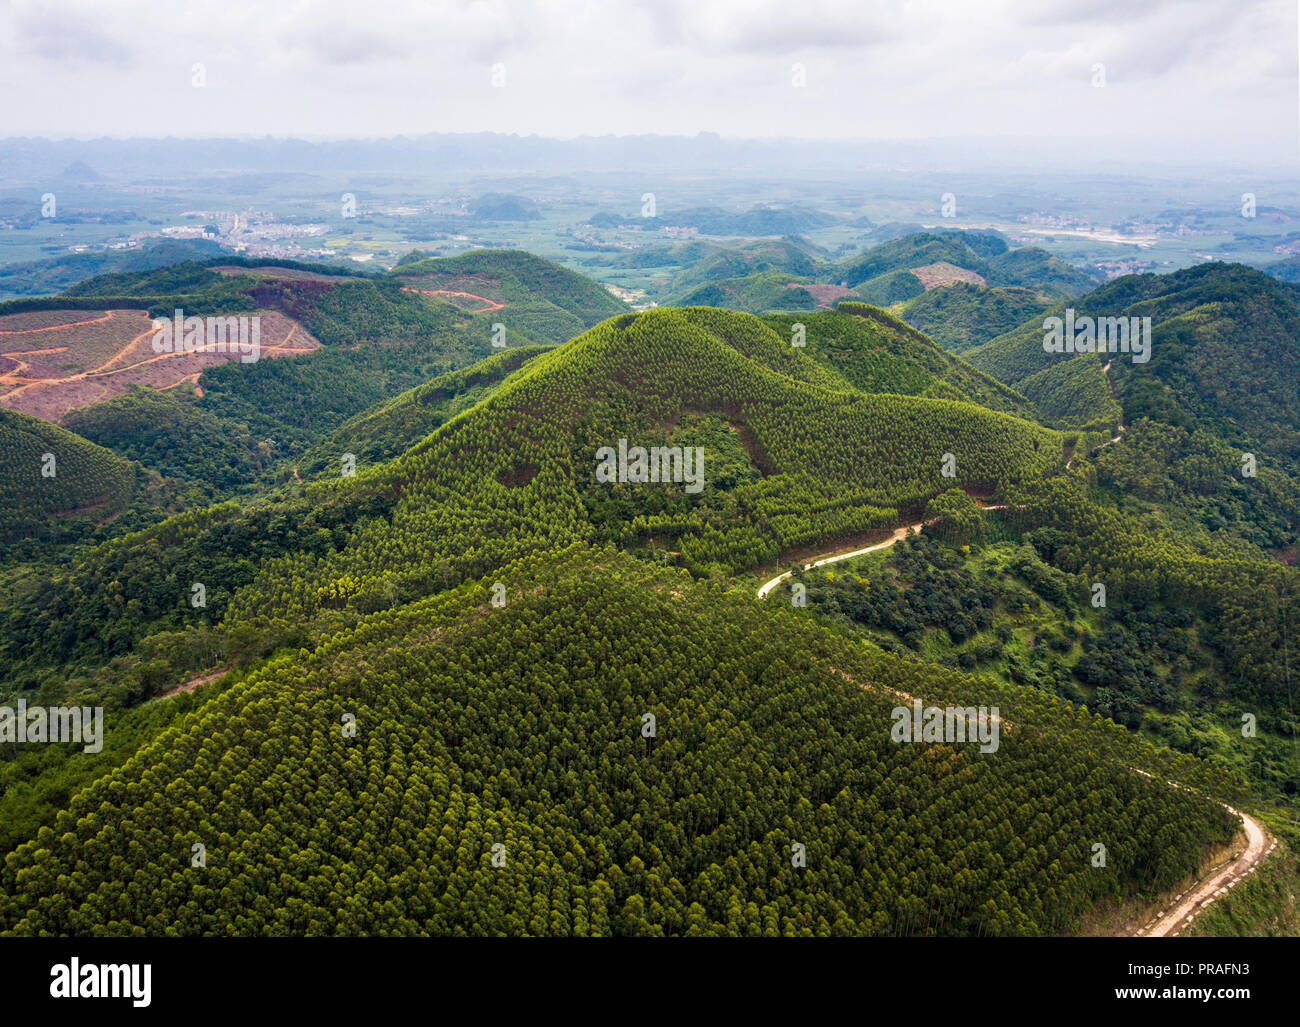 Aerial view of fast growing Transgenic Eucalyptus forest in China Stock Photo